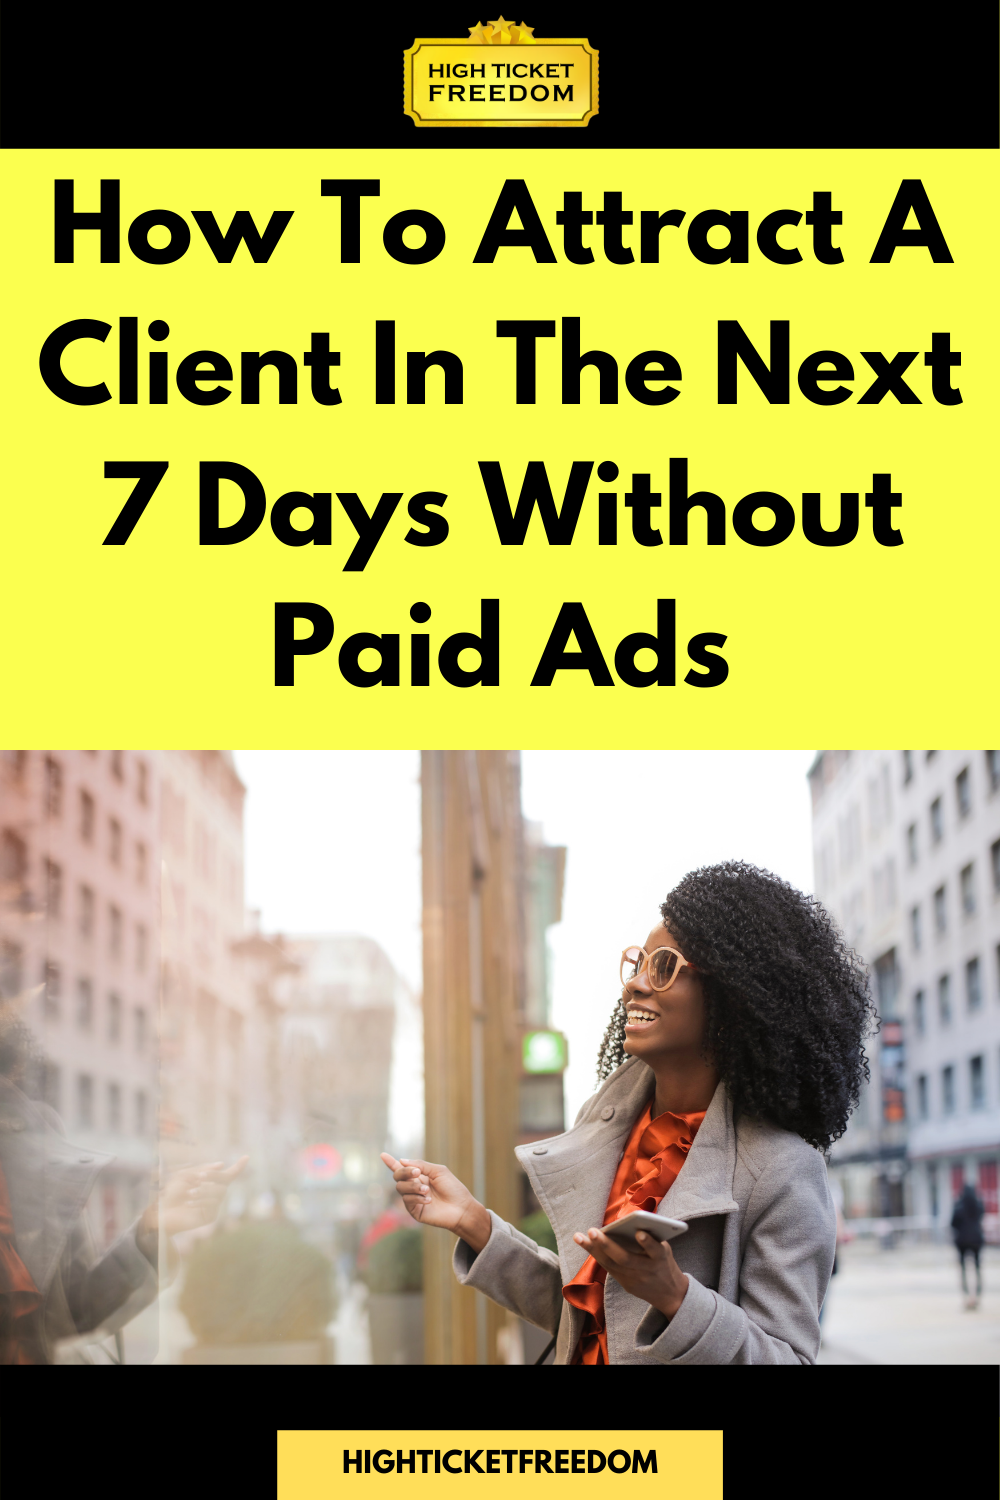 How To Attract A Client In The Next 7 Days Without Paid Ads